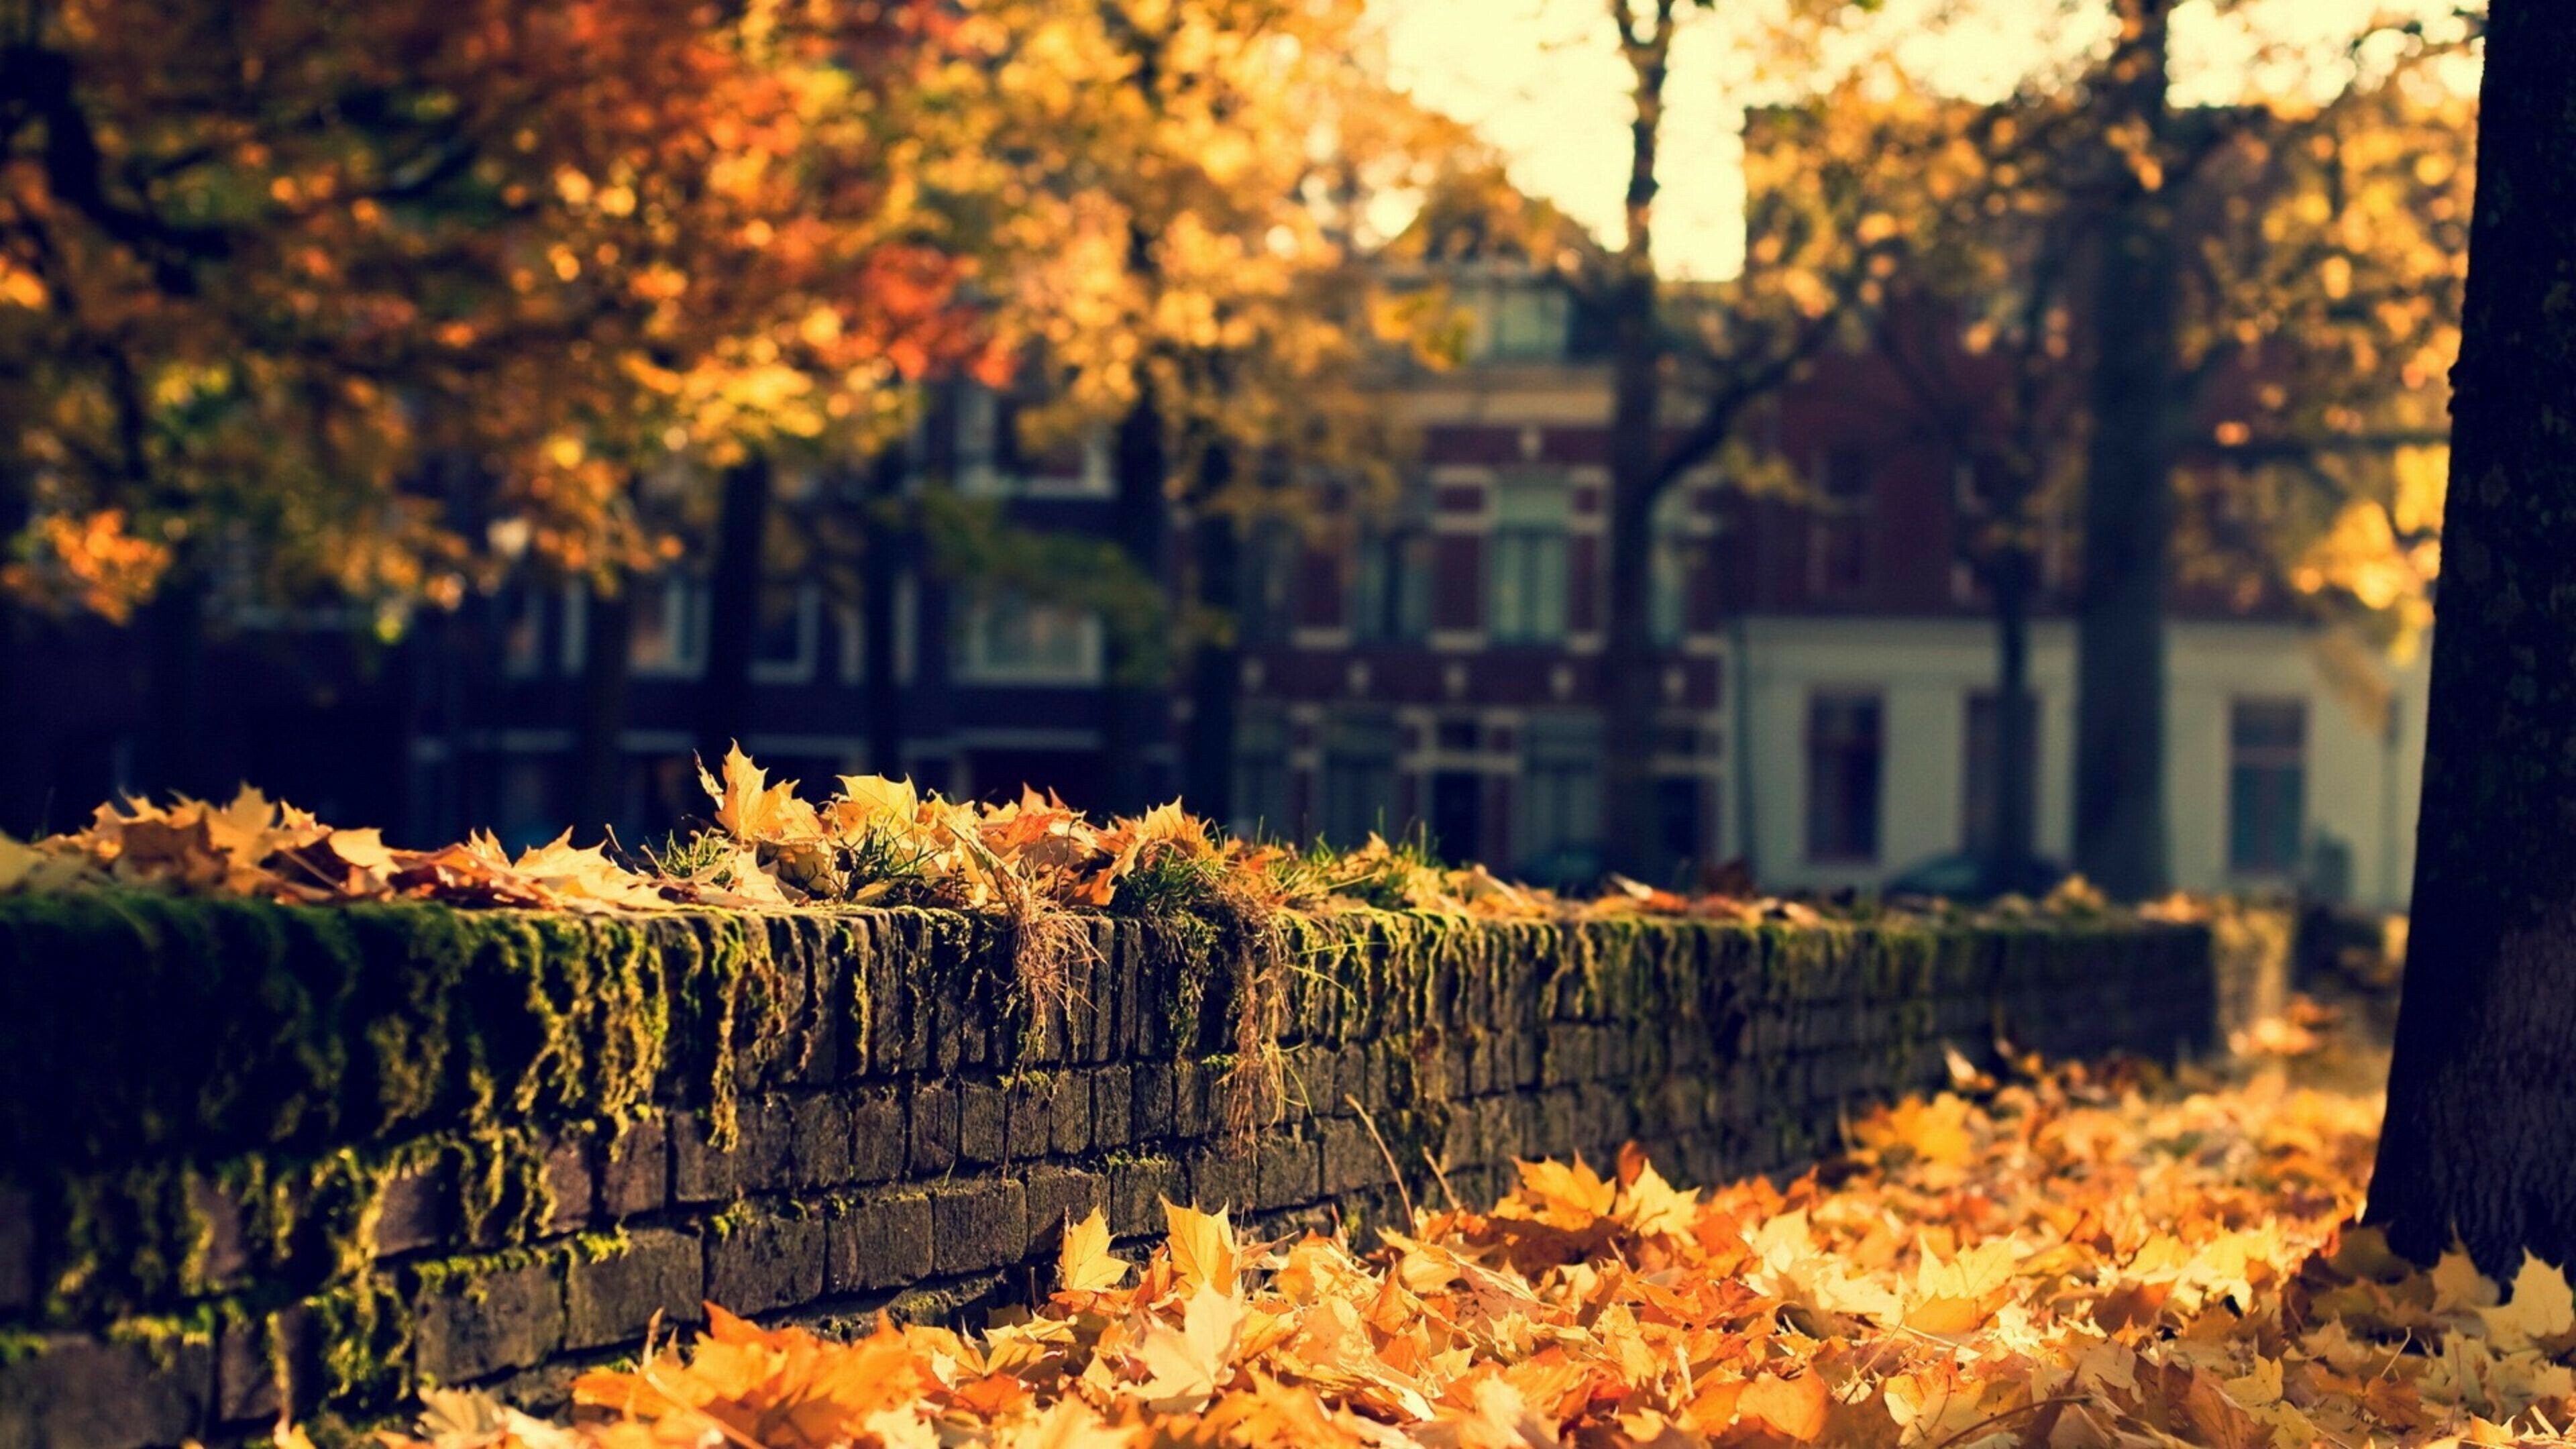 Autumn: Brightly colored maple leaves, Fall, Foliage. 3840x2160 4K Wallpaper.